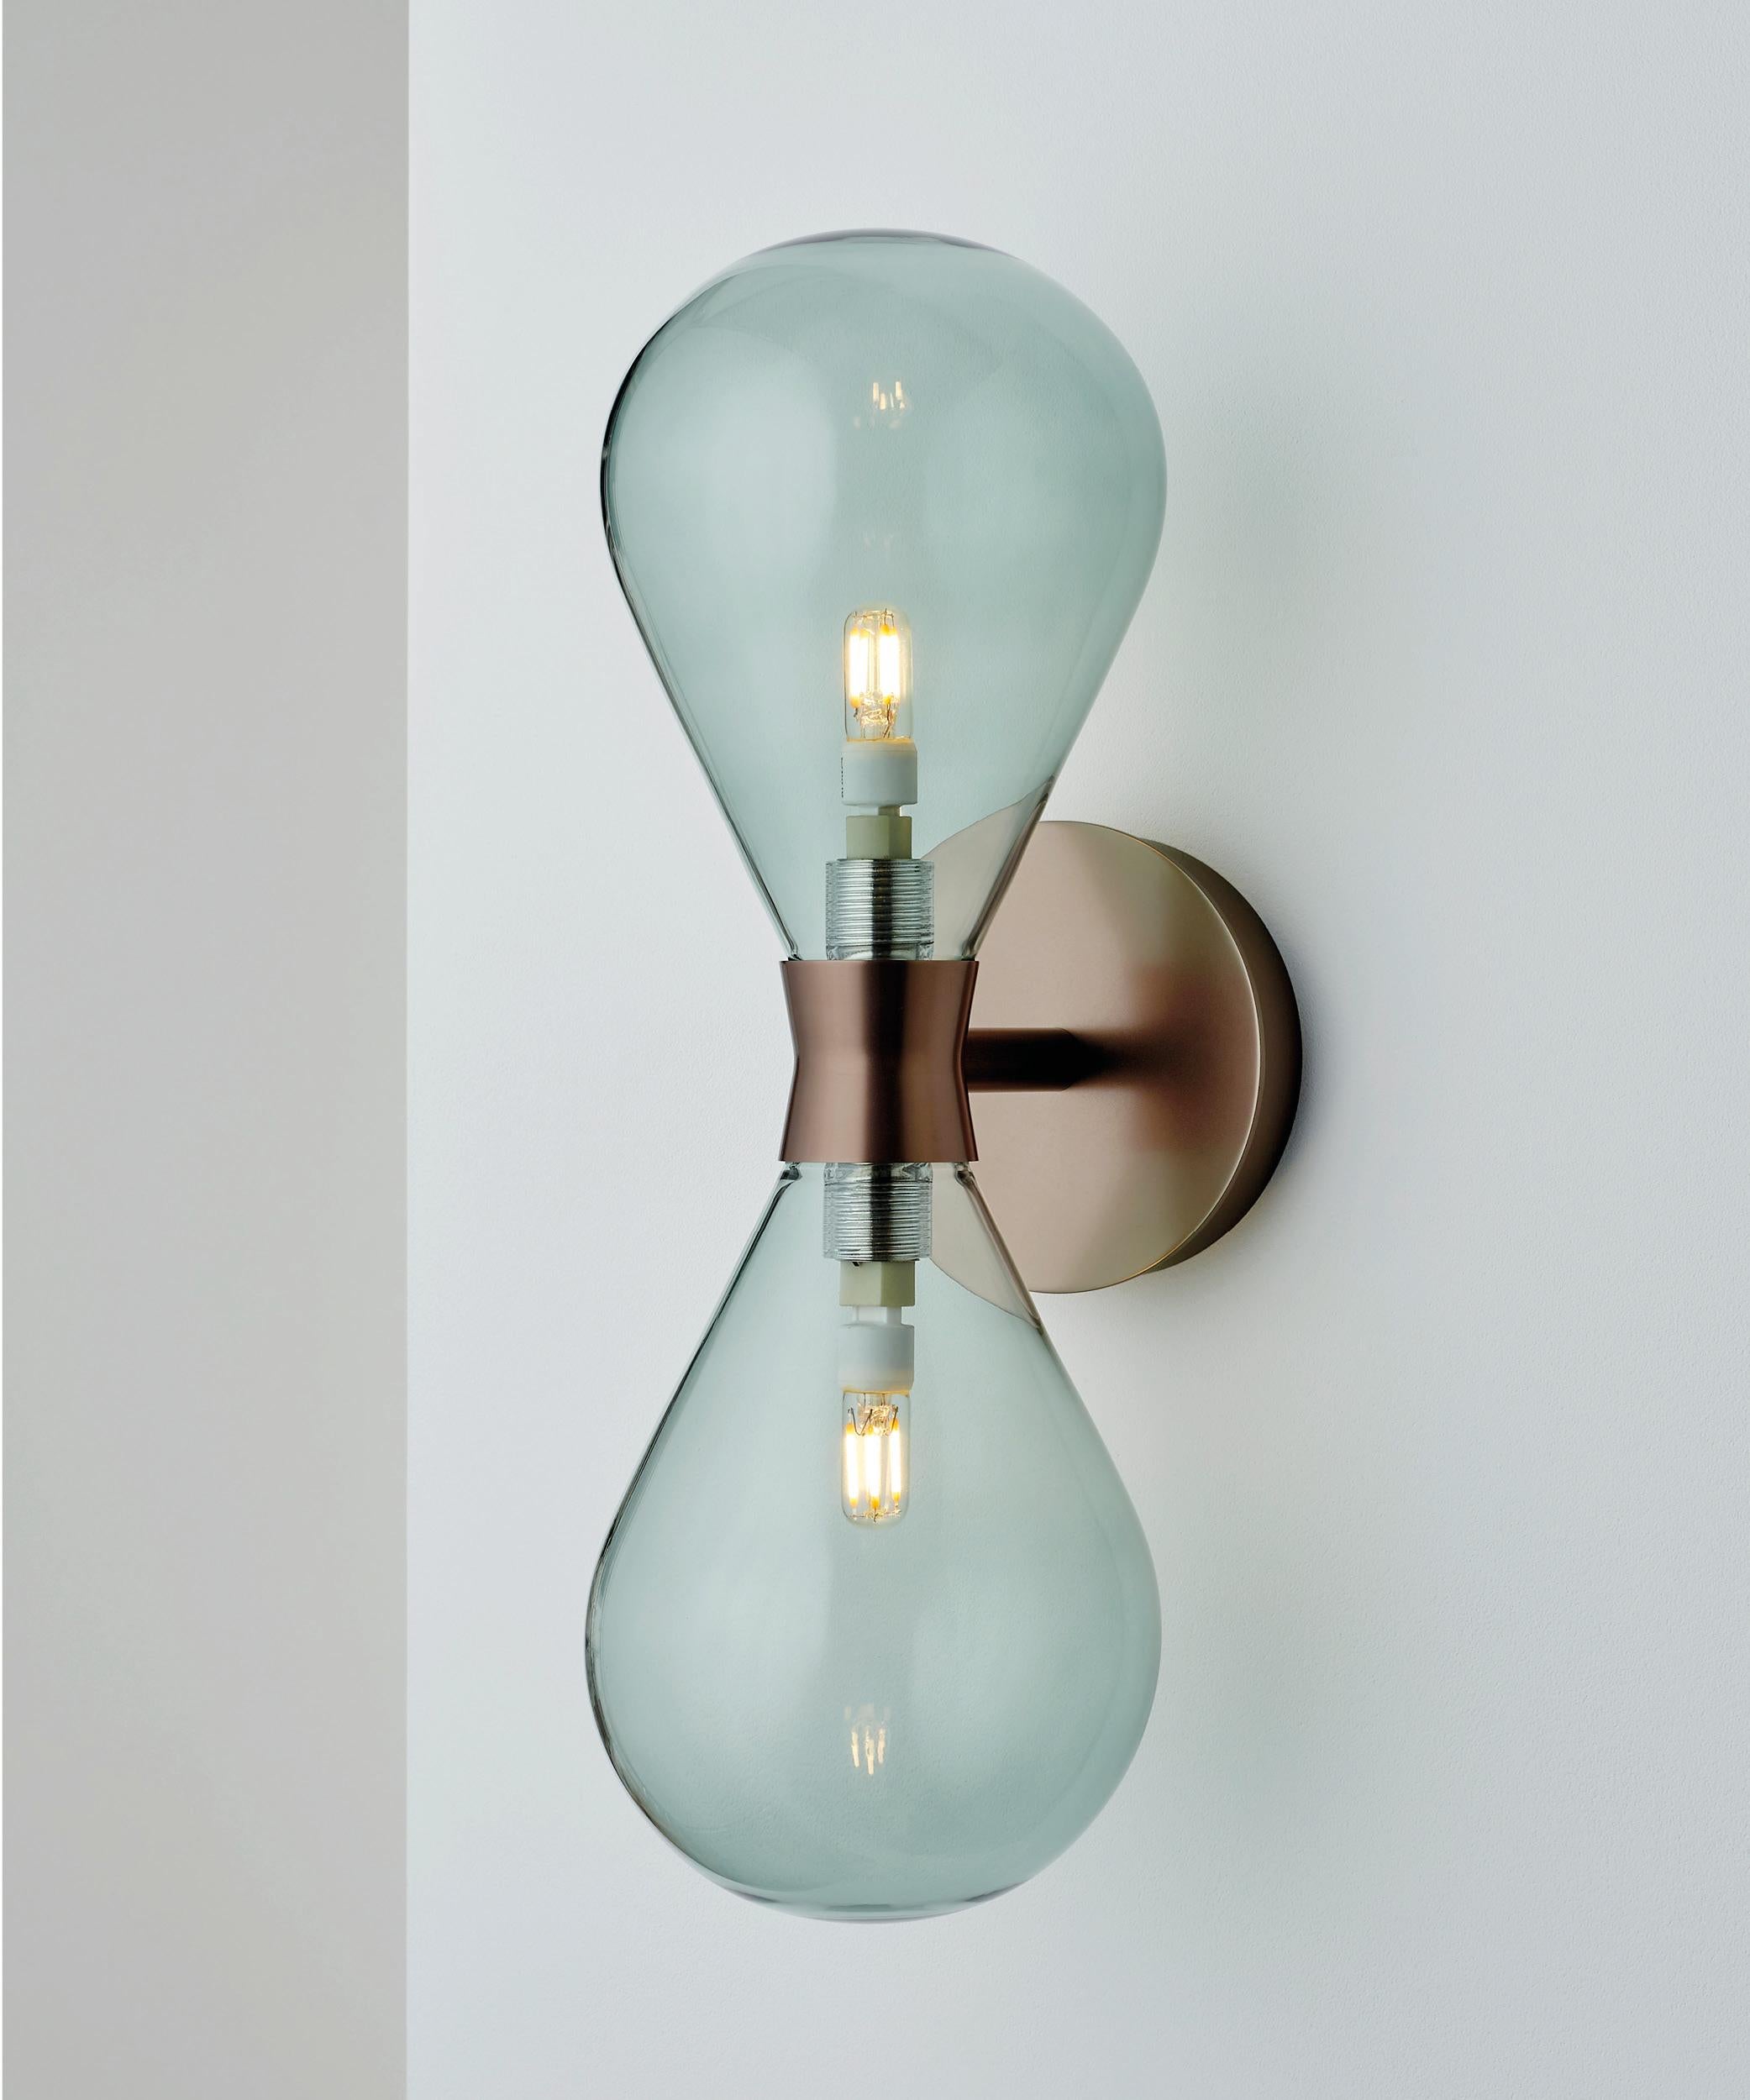 Cintola Wall Light Twin in Polished Aluminium with Bronze Handblown Glass Globes In New Condition For Sale In London, GB